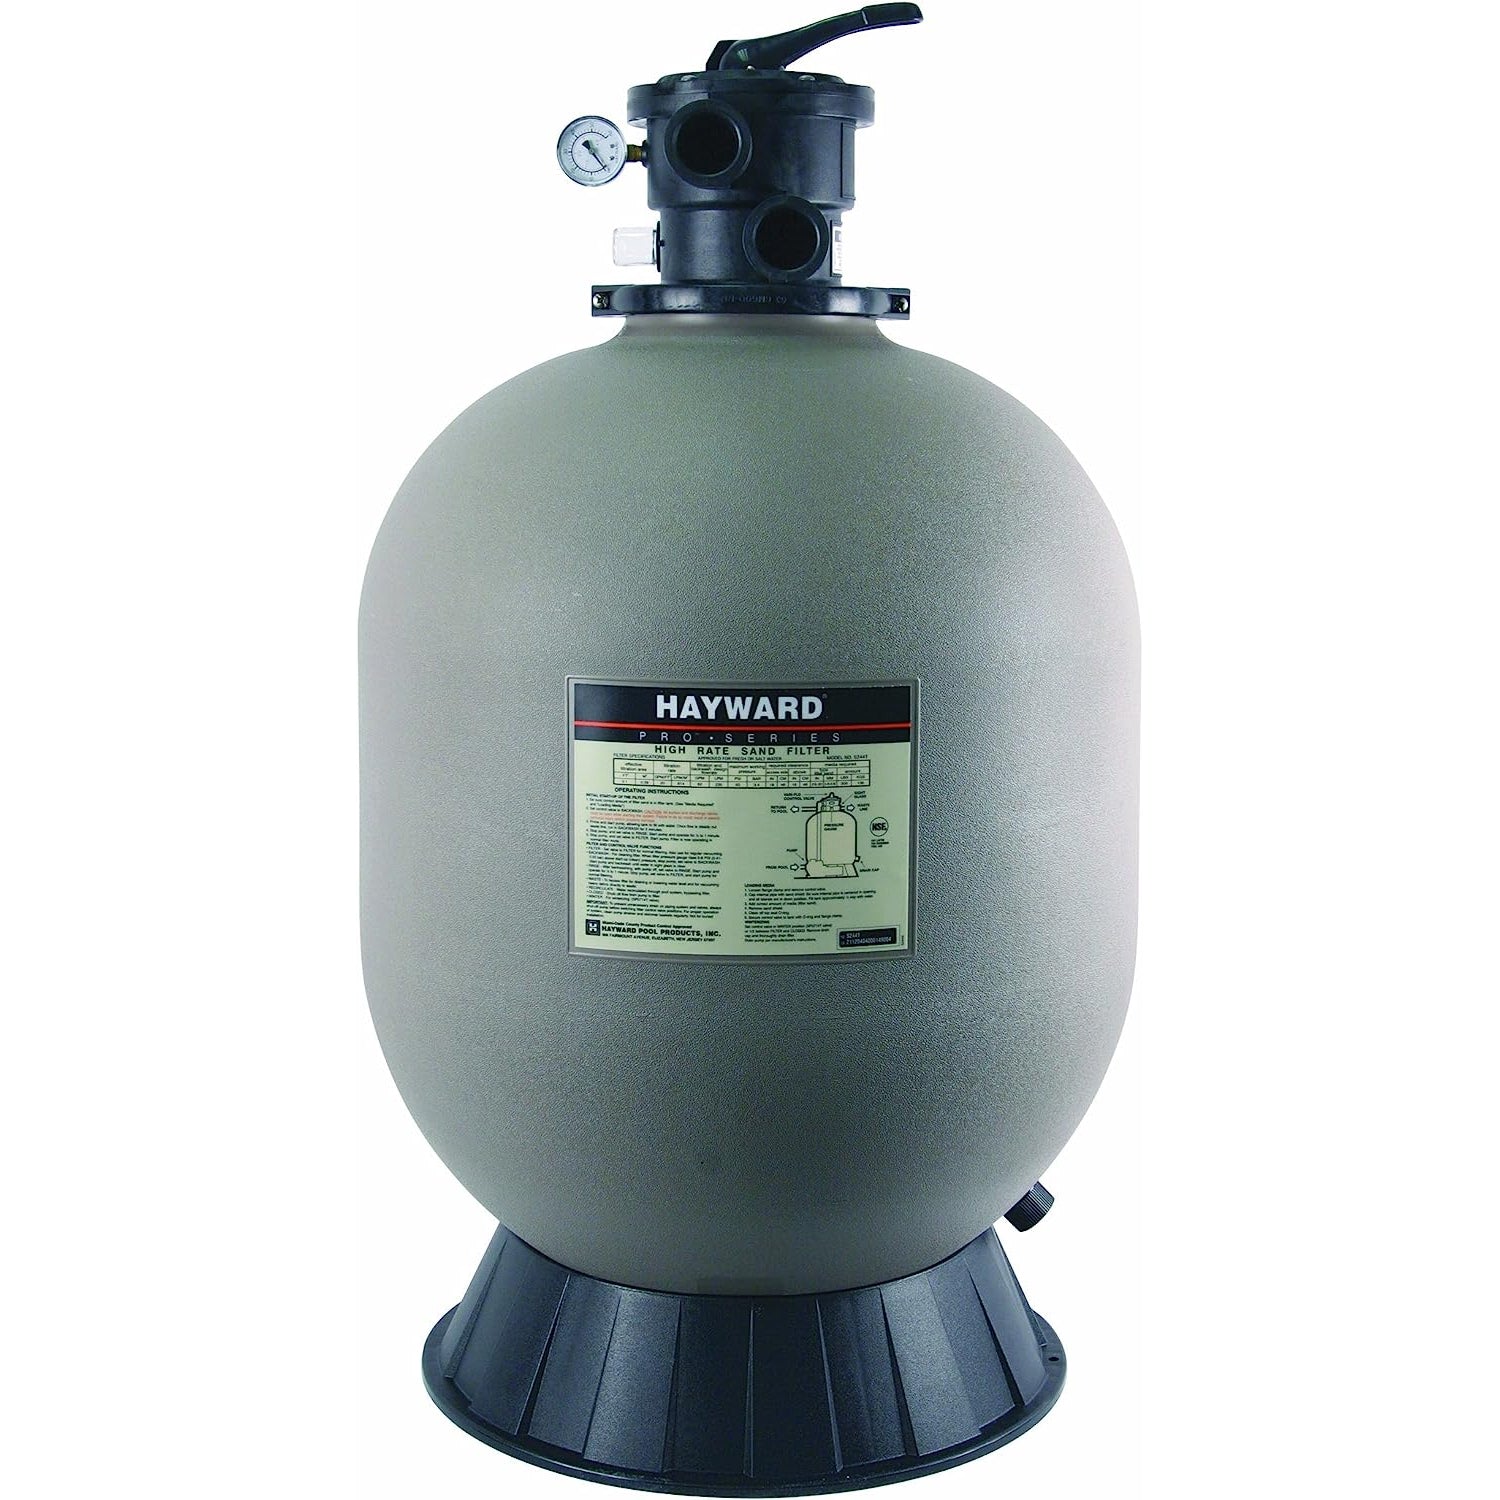 Hayward W3S244T2 Pro Series Sand Filter With Top Mount Valve - 2"